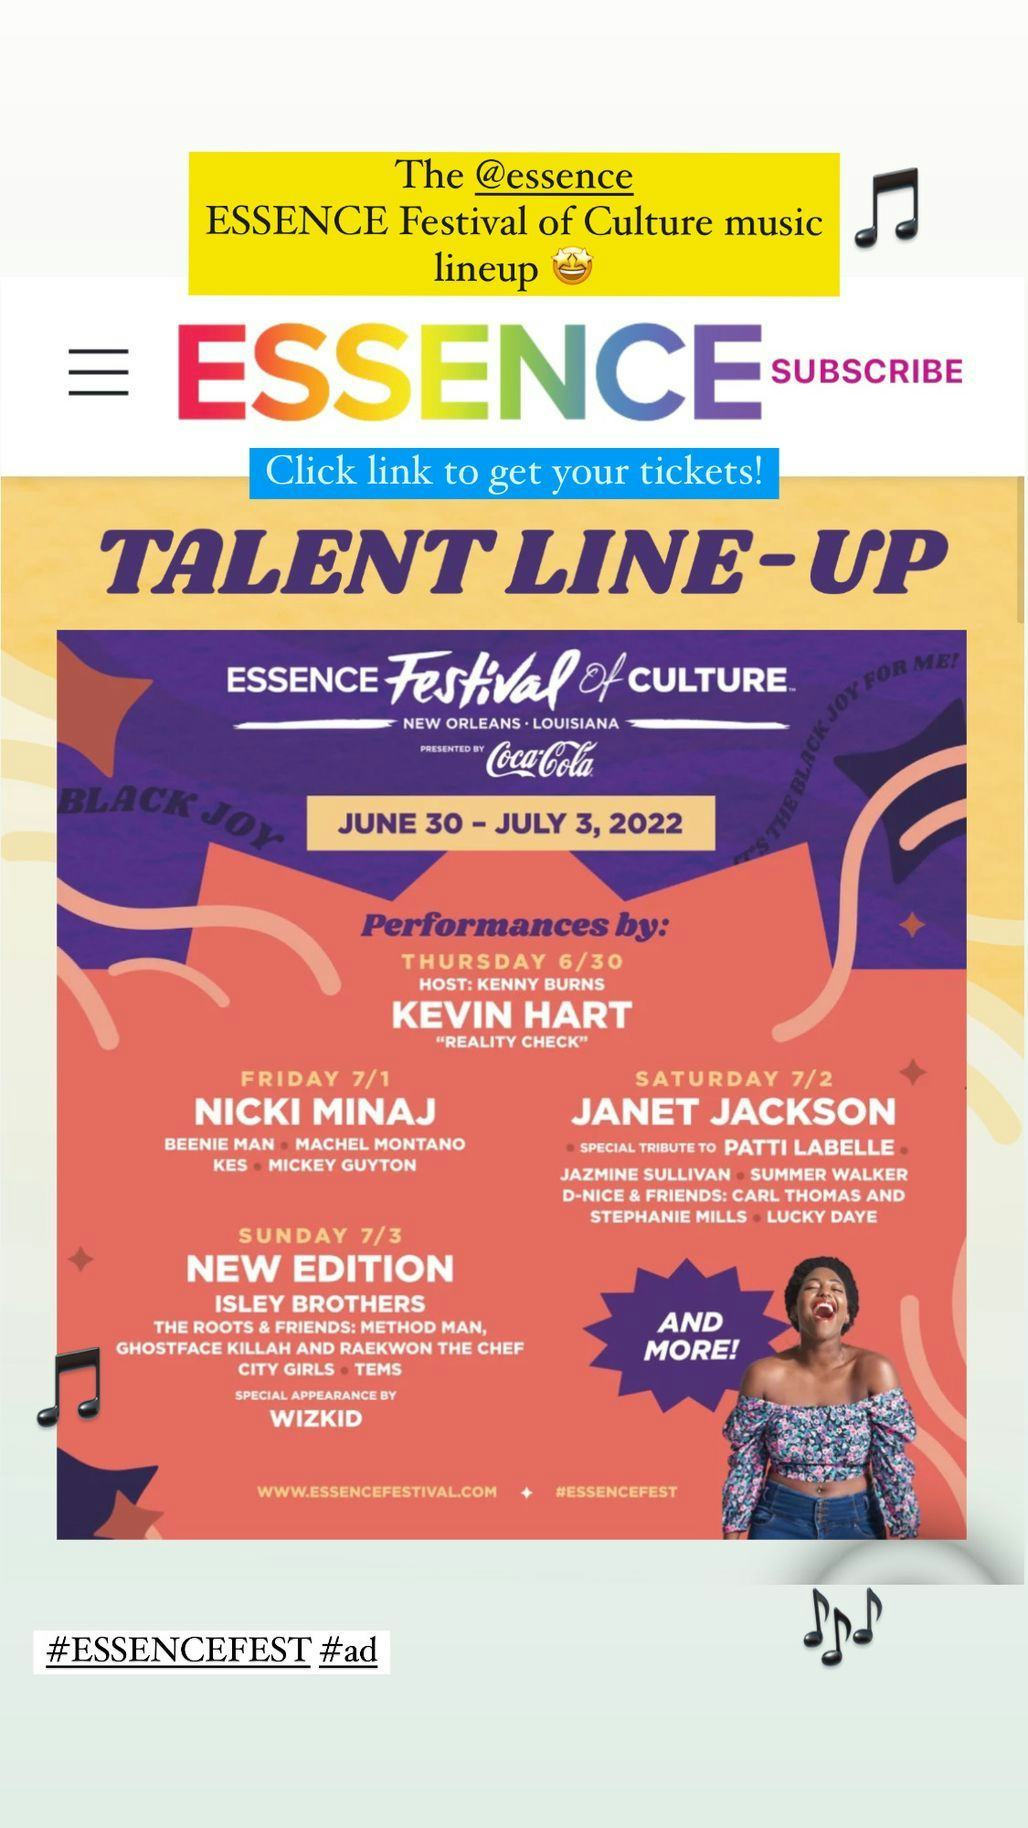 Talent line up for ESSENCE